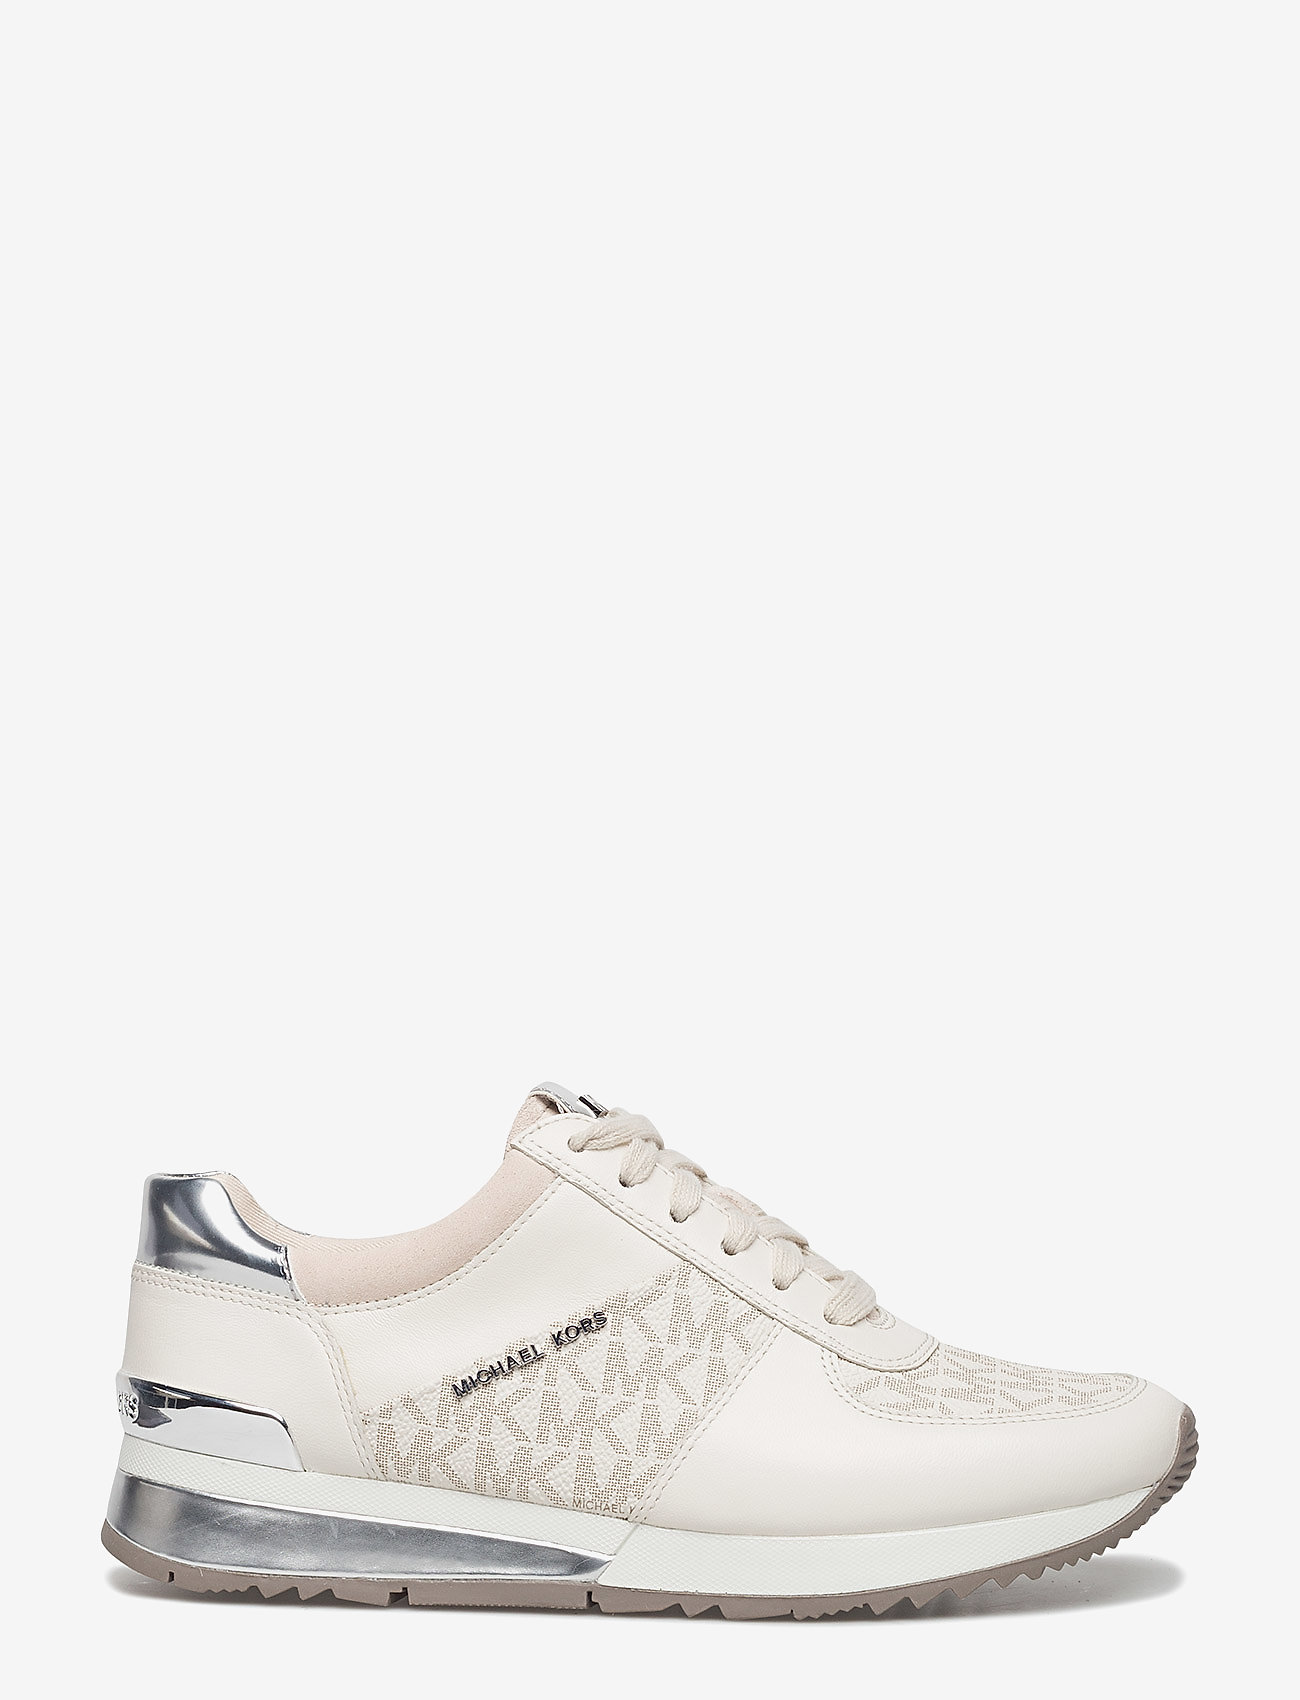 michael kors trainers for sale cheap online